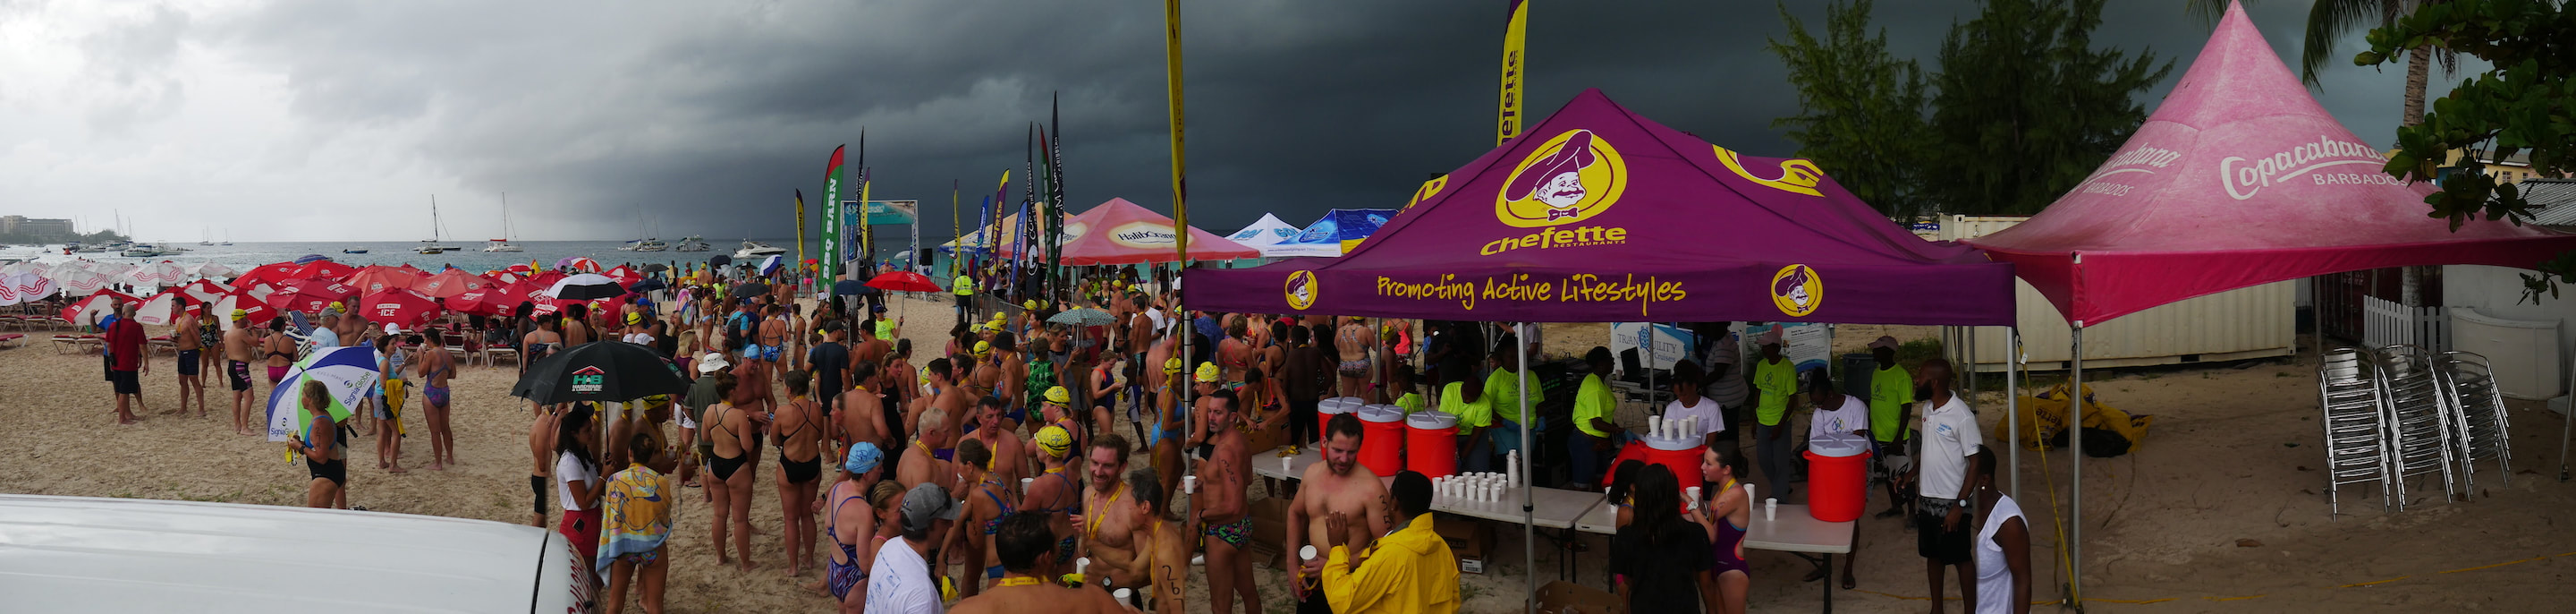 Barbados Open Water Festival 2019 - Cloudy Day